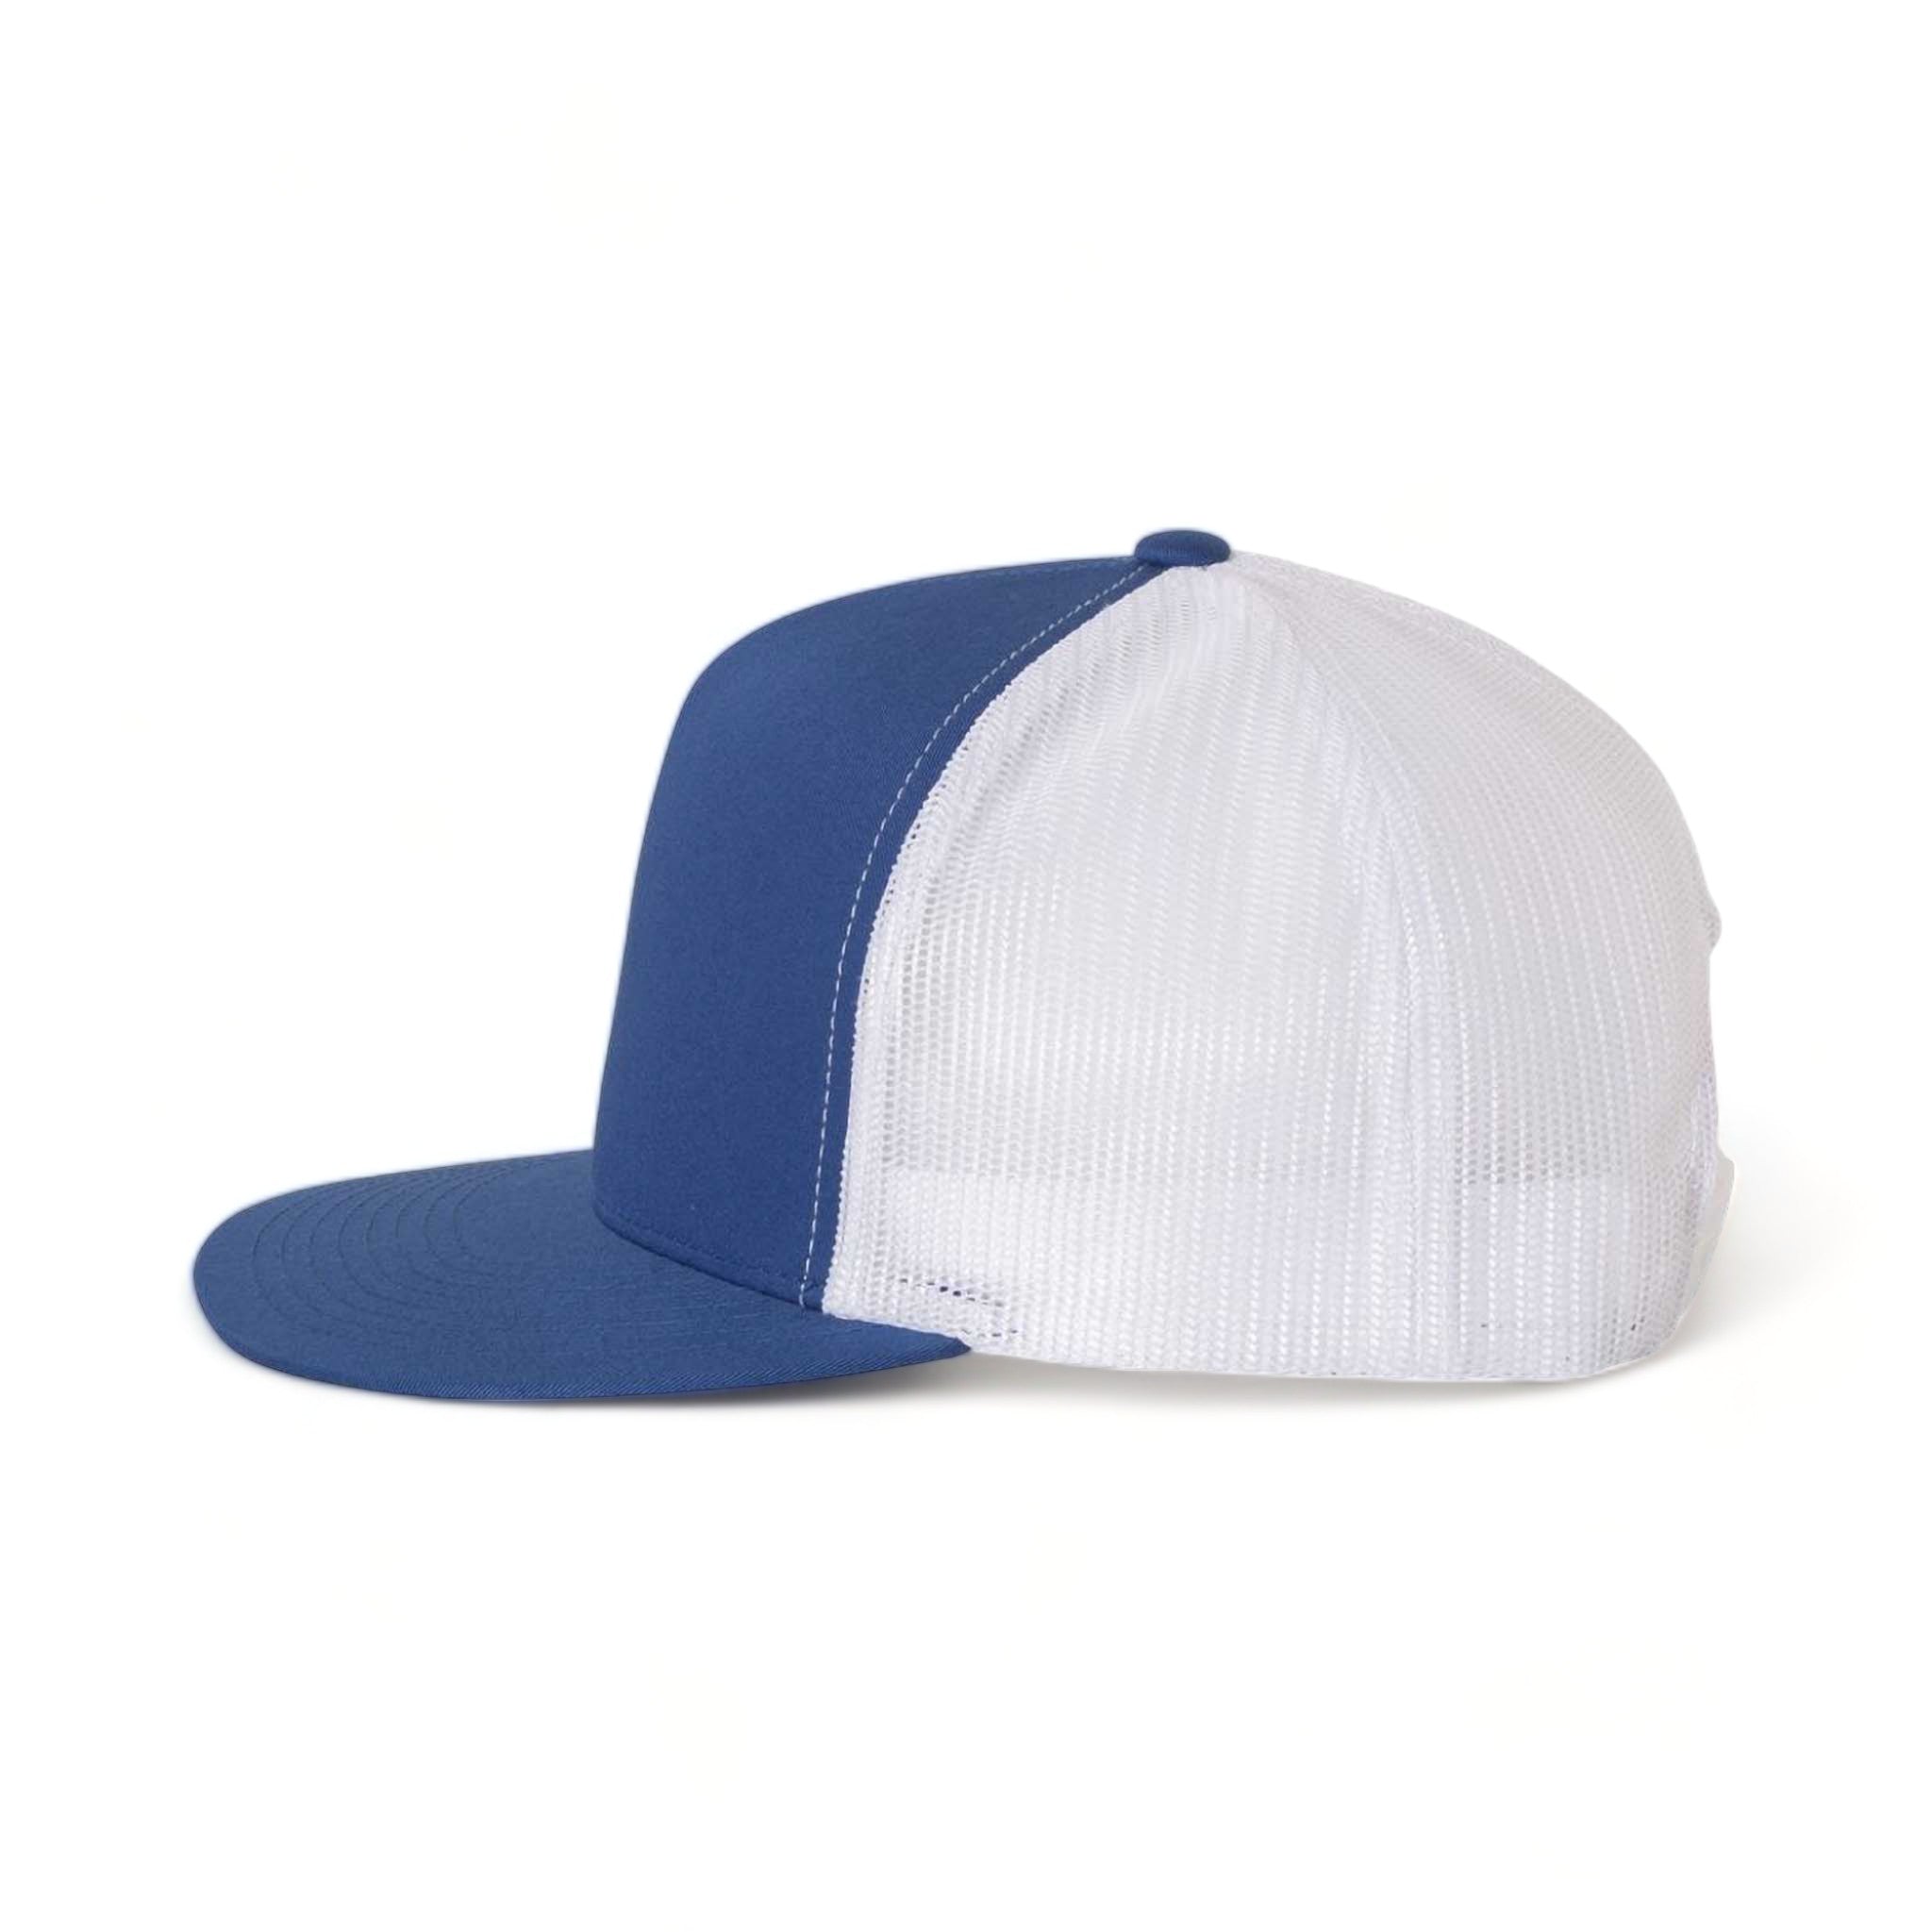 Side view of YP Classics 6006 custom hat in royal and white